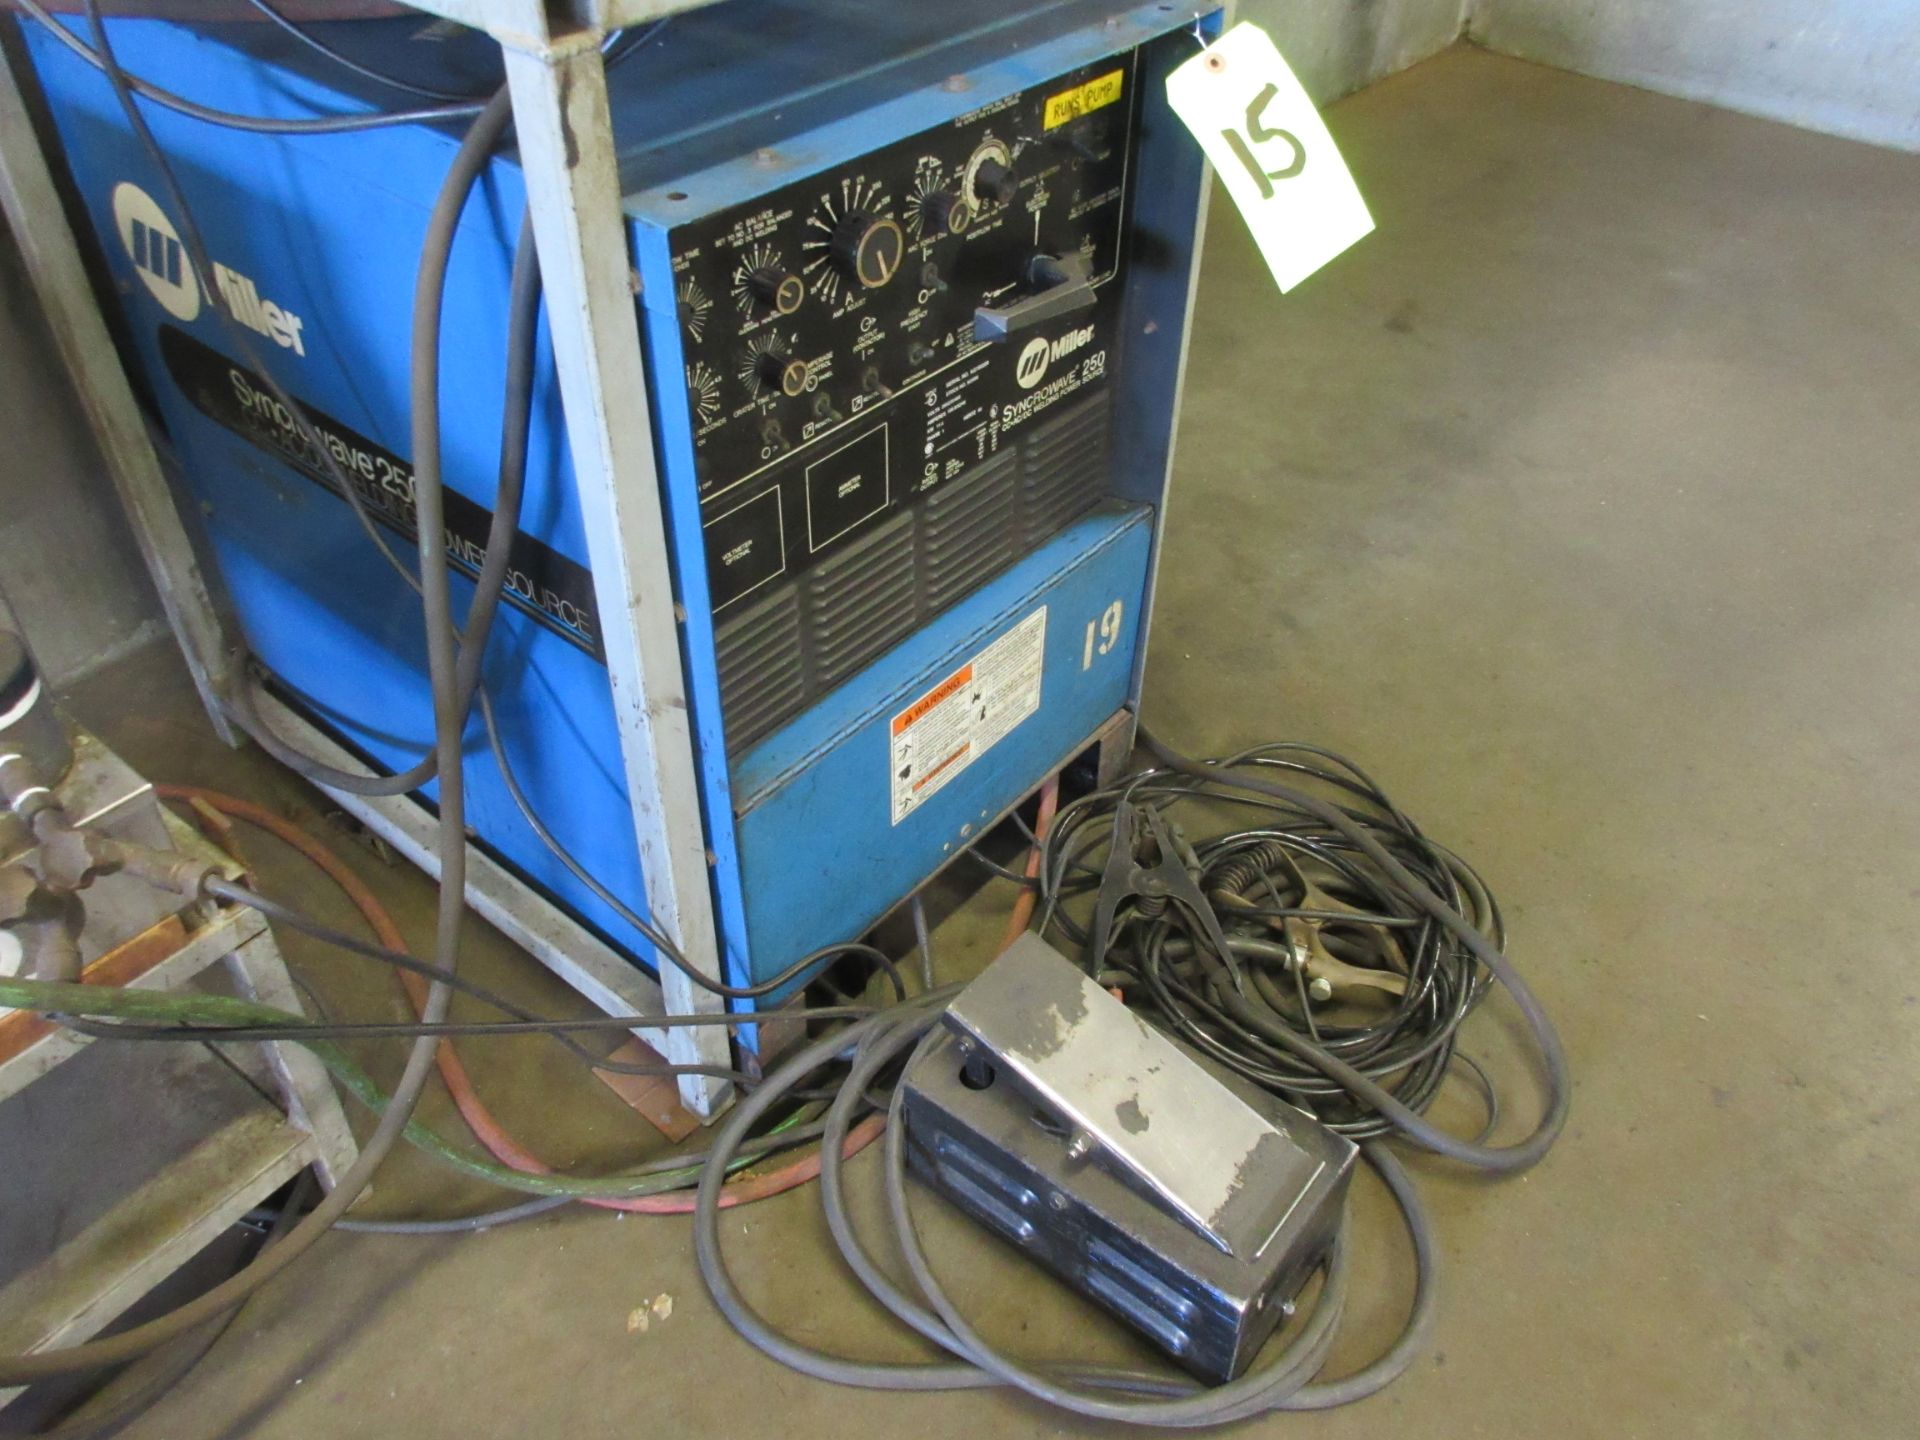 MILLER SYNCROWAVE 250 CONSTANT CURRENT AC/DC ARC WELDER W/ FOOT CONTROL - Image 3 of 3